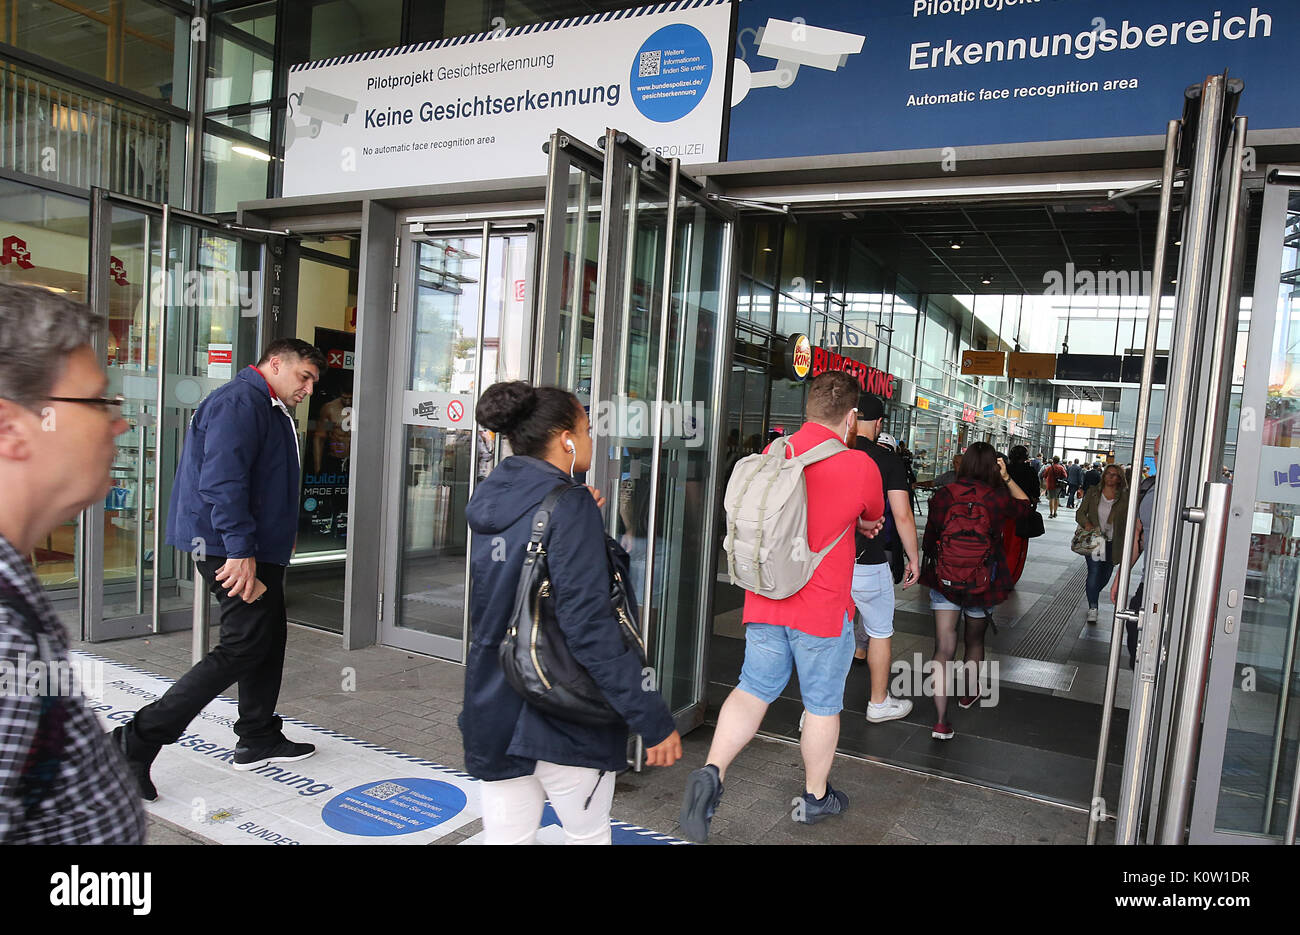 Travelers using an entrance marked with the text "face recognition ...